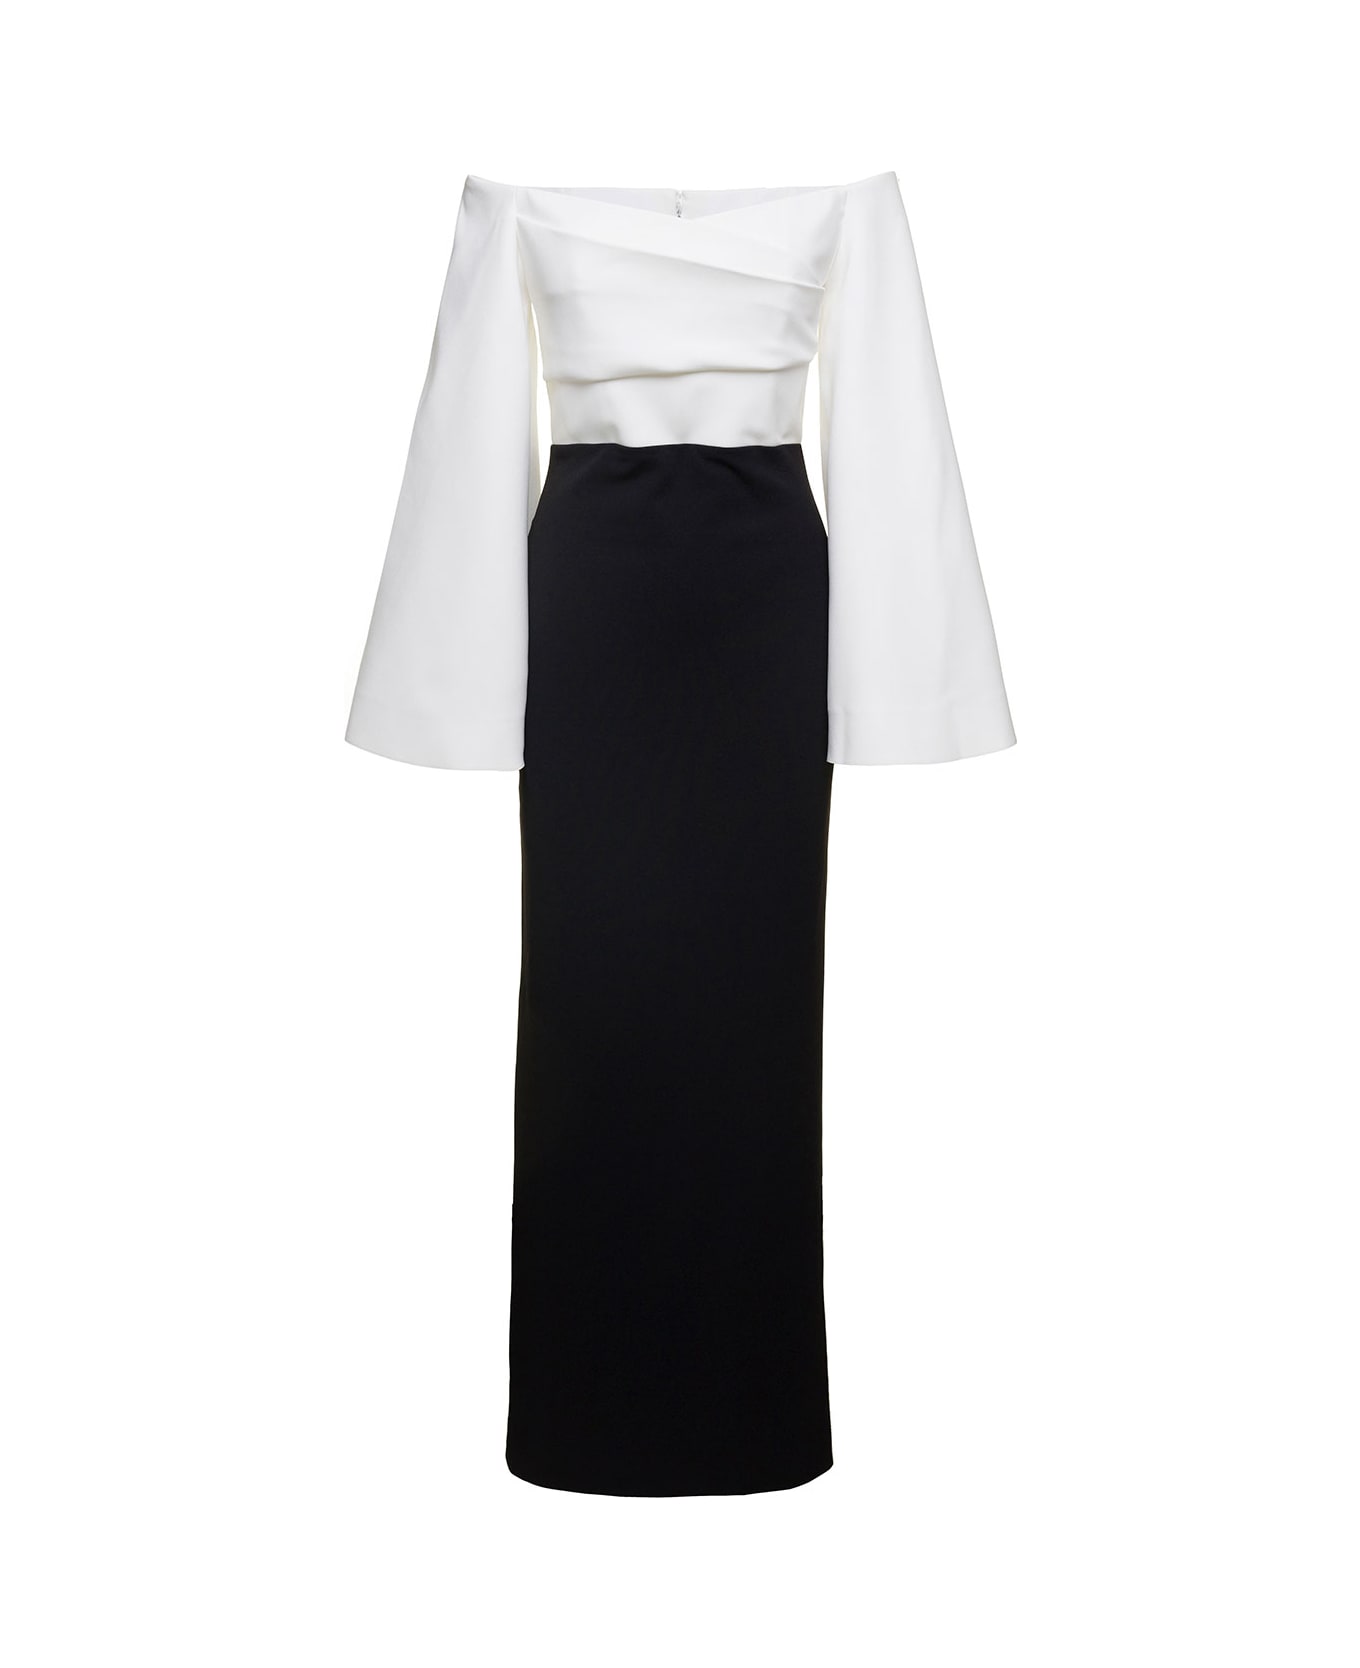 Solace London Eliana Off-shoulder Maxi Dress In Black And White Satin - White/black